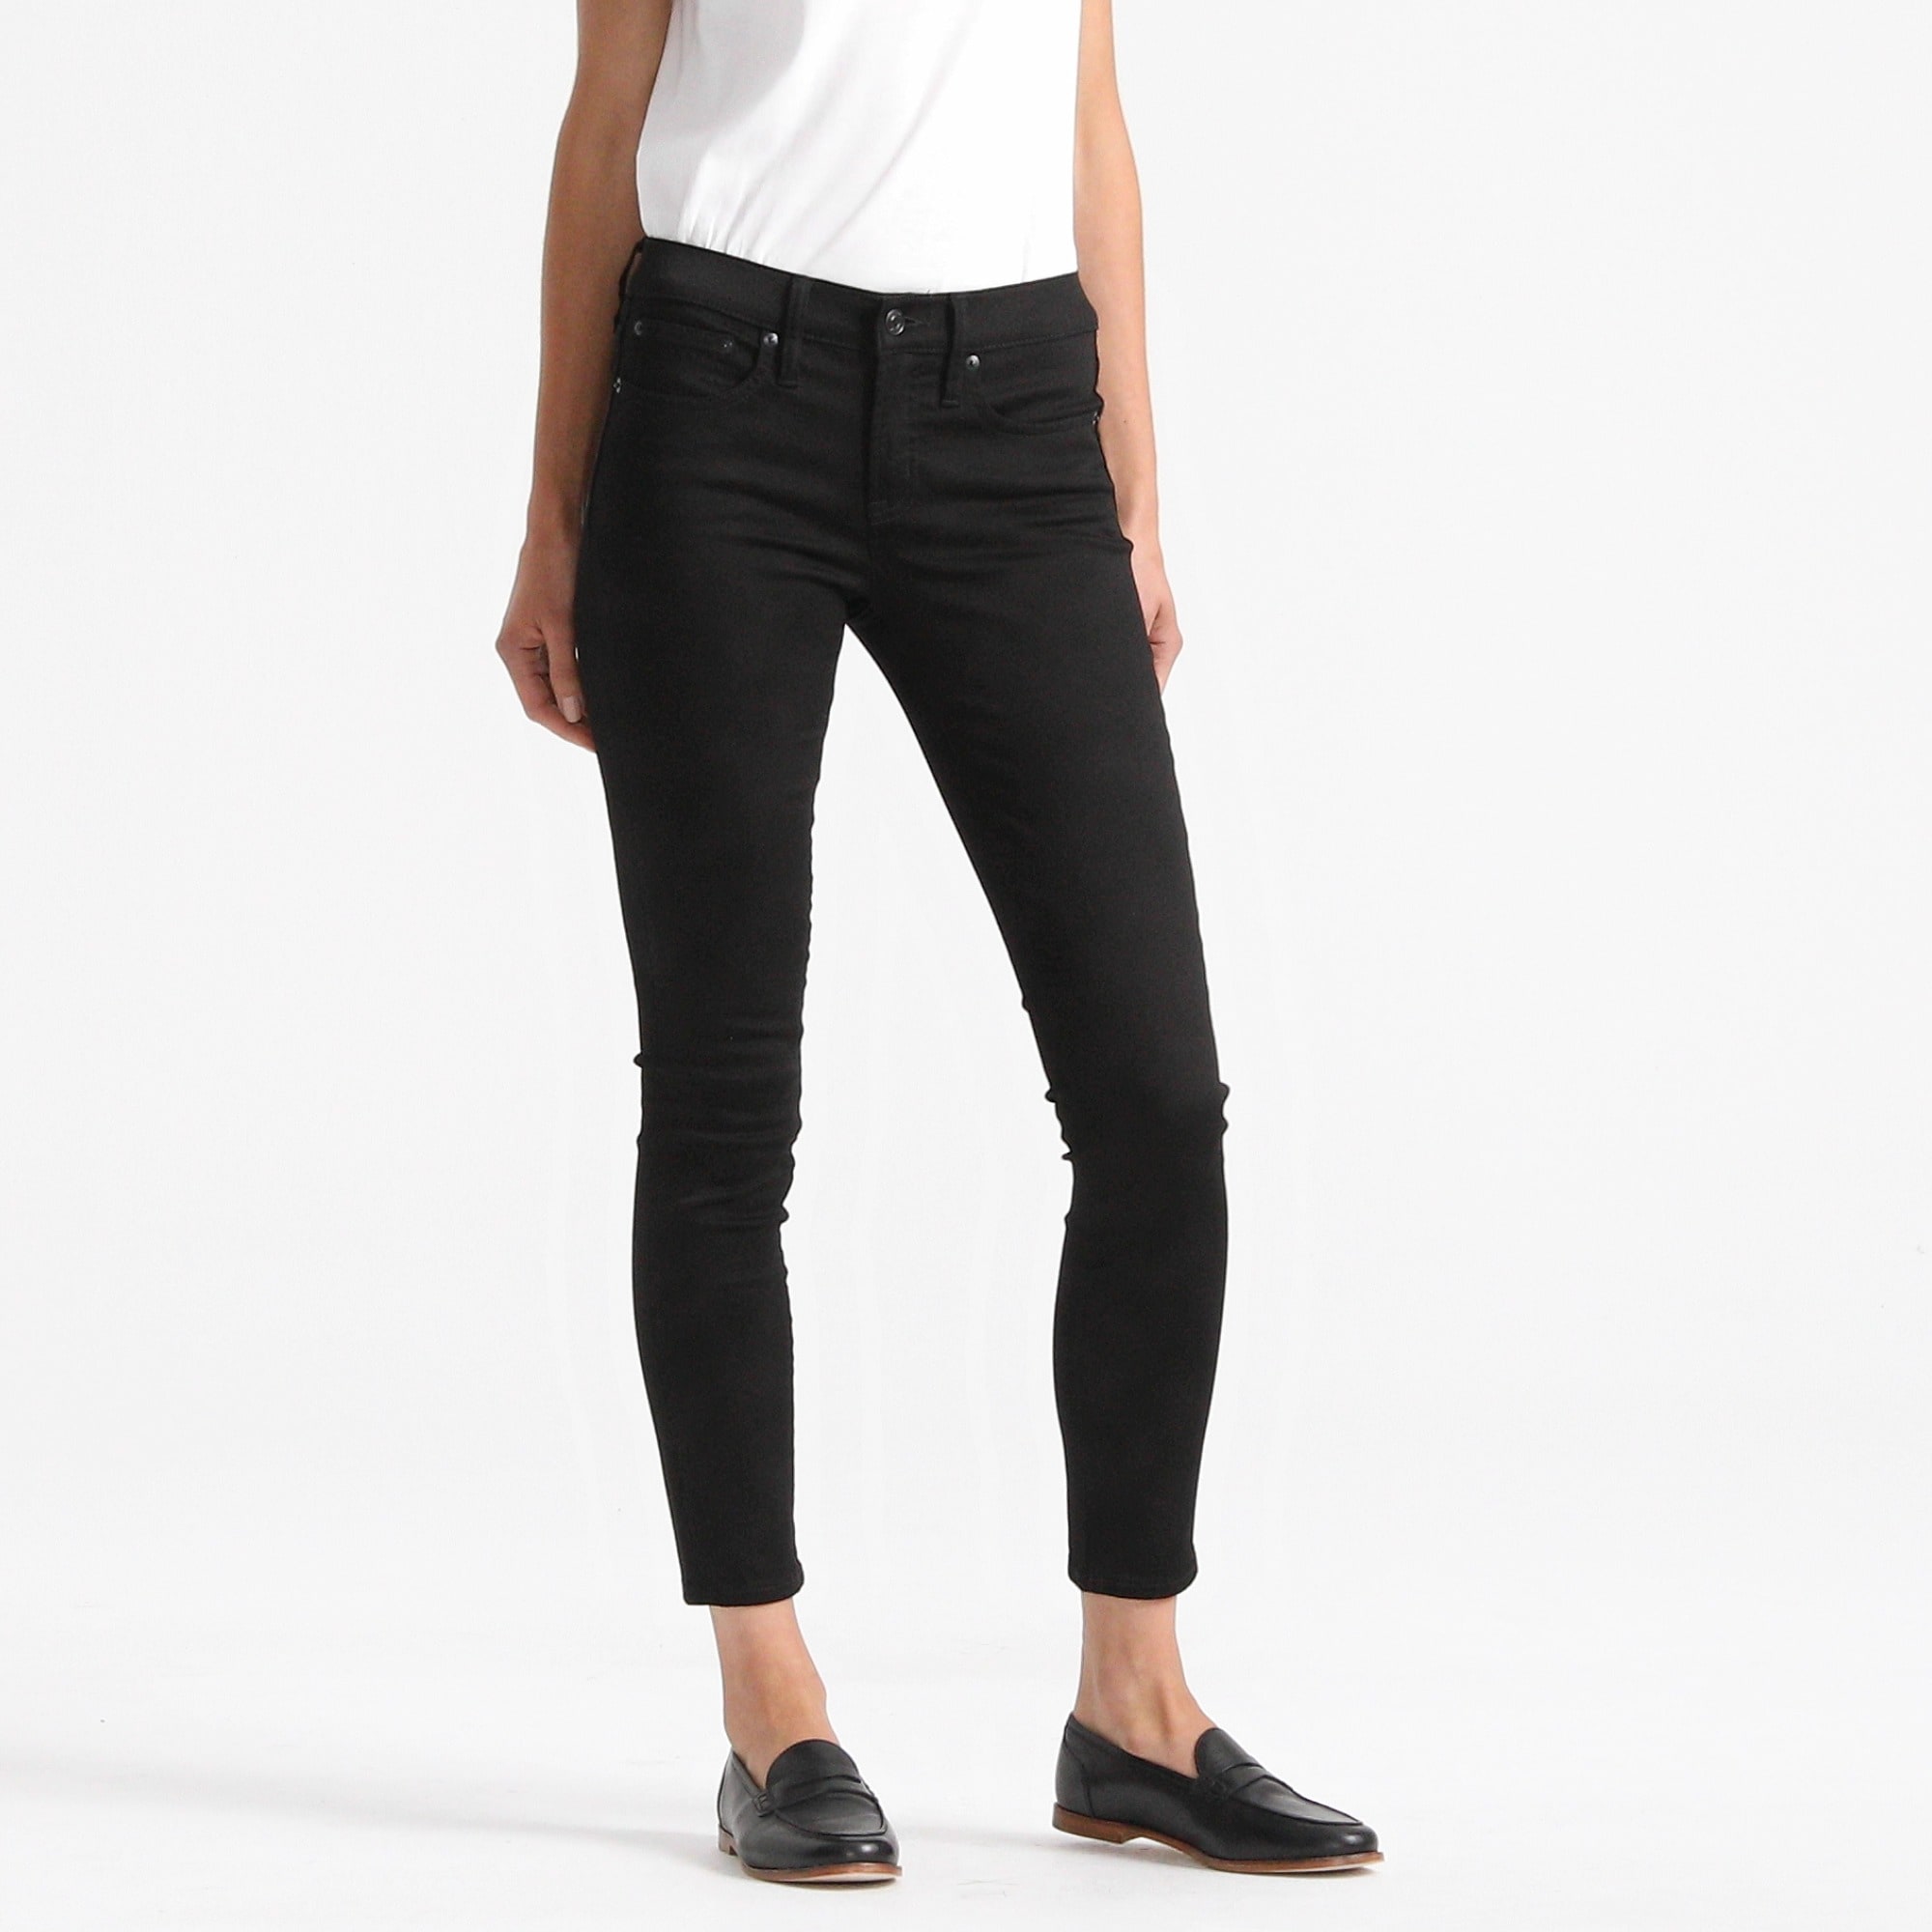 8" stretchy toothpick jean in true black